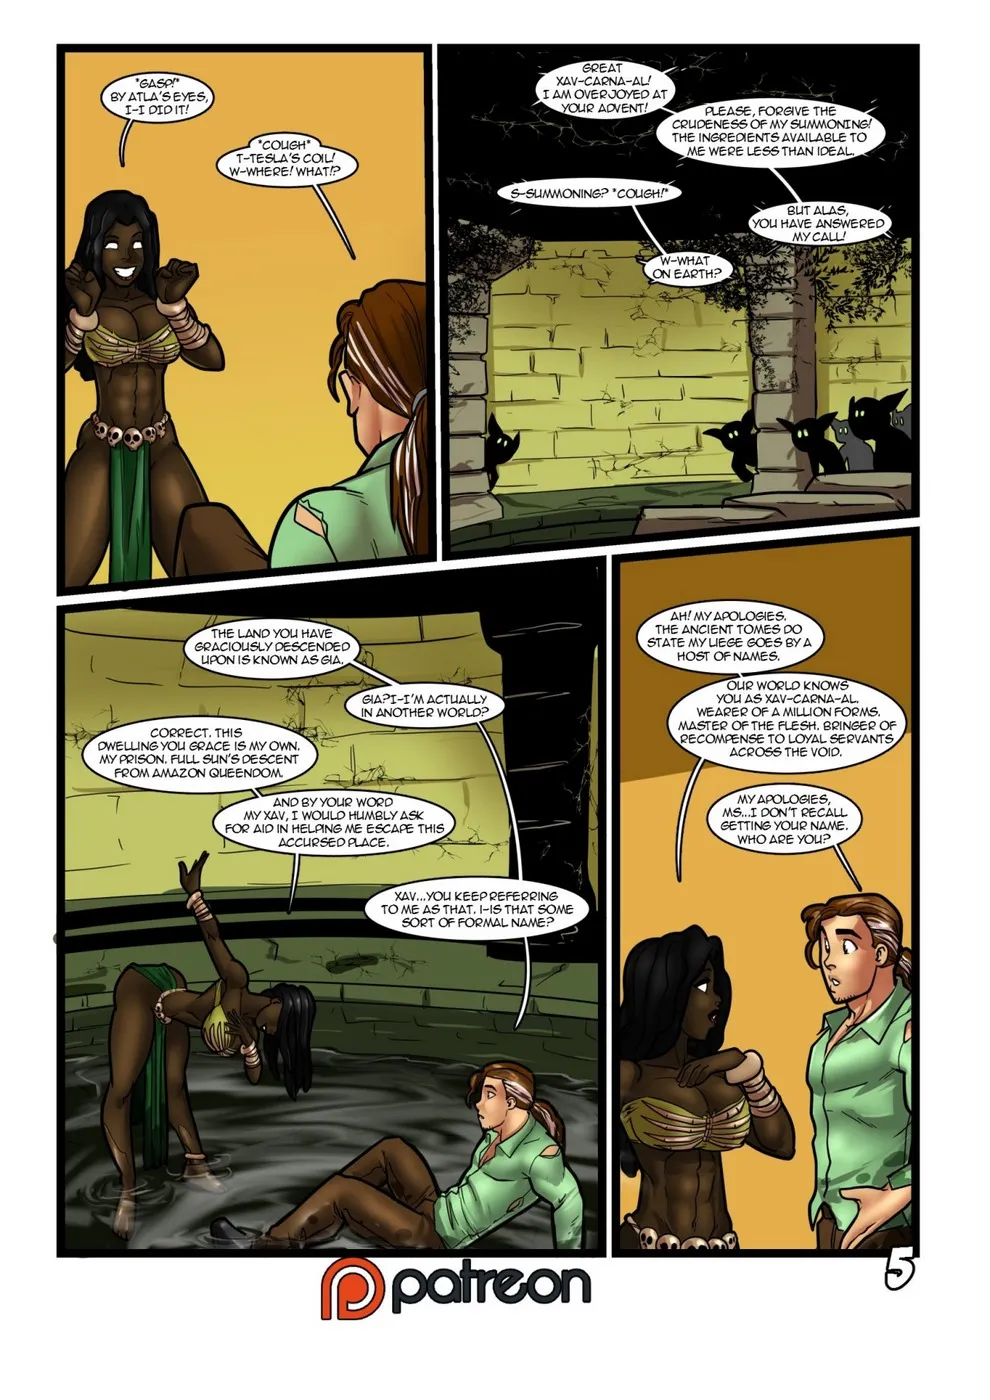 Hero Tales #2- Enter the Mad Witch - Page 6